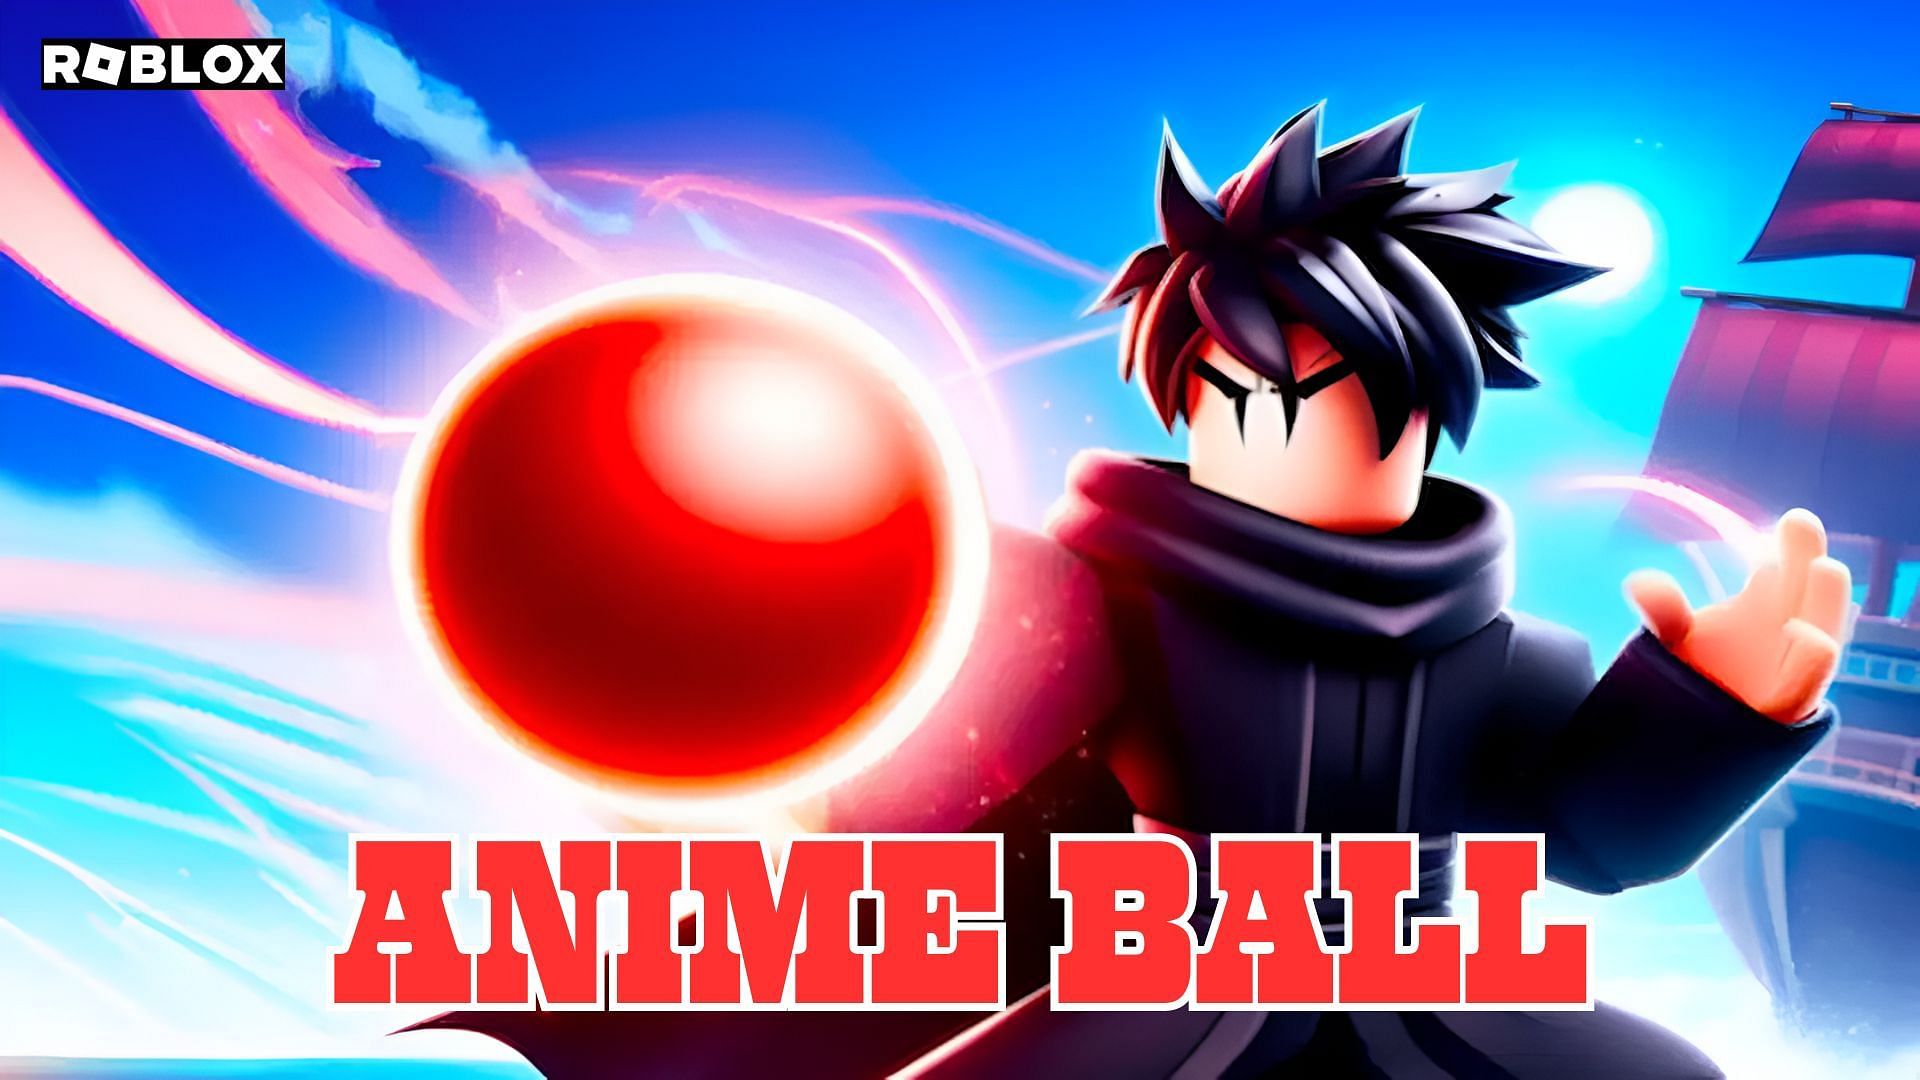 All you need to know about Anime Ball (Image via Roblox and Sportskeeda)